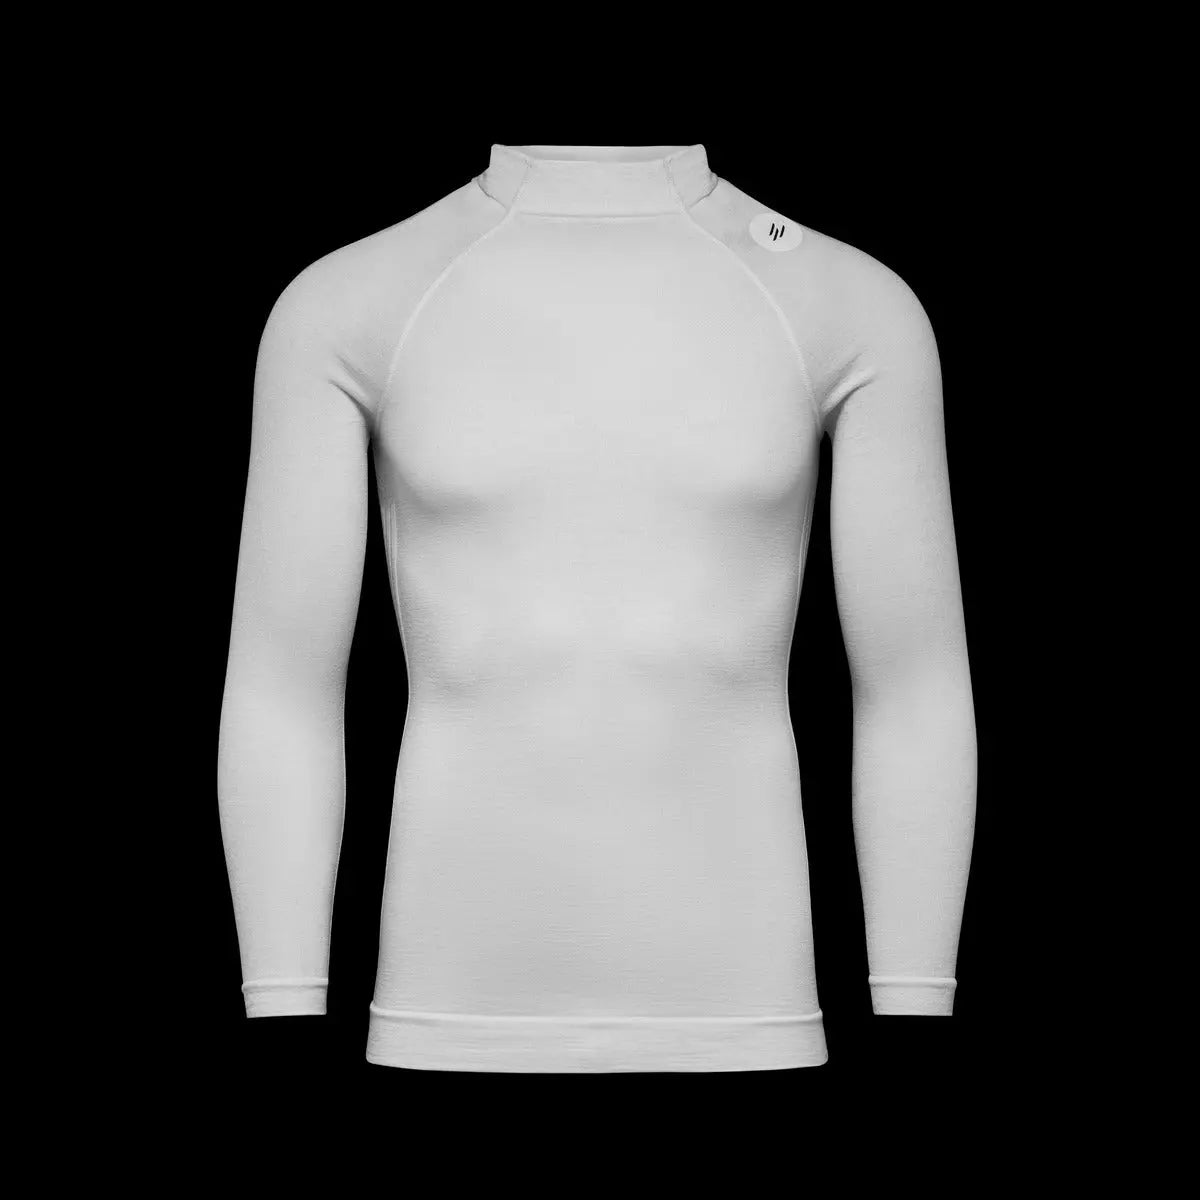 Fyshe Techfit Top in White - The Ultimate Workout Top –